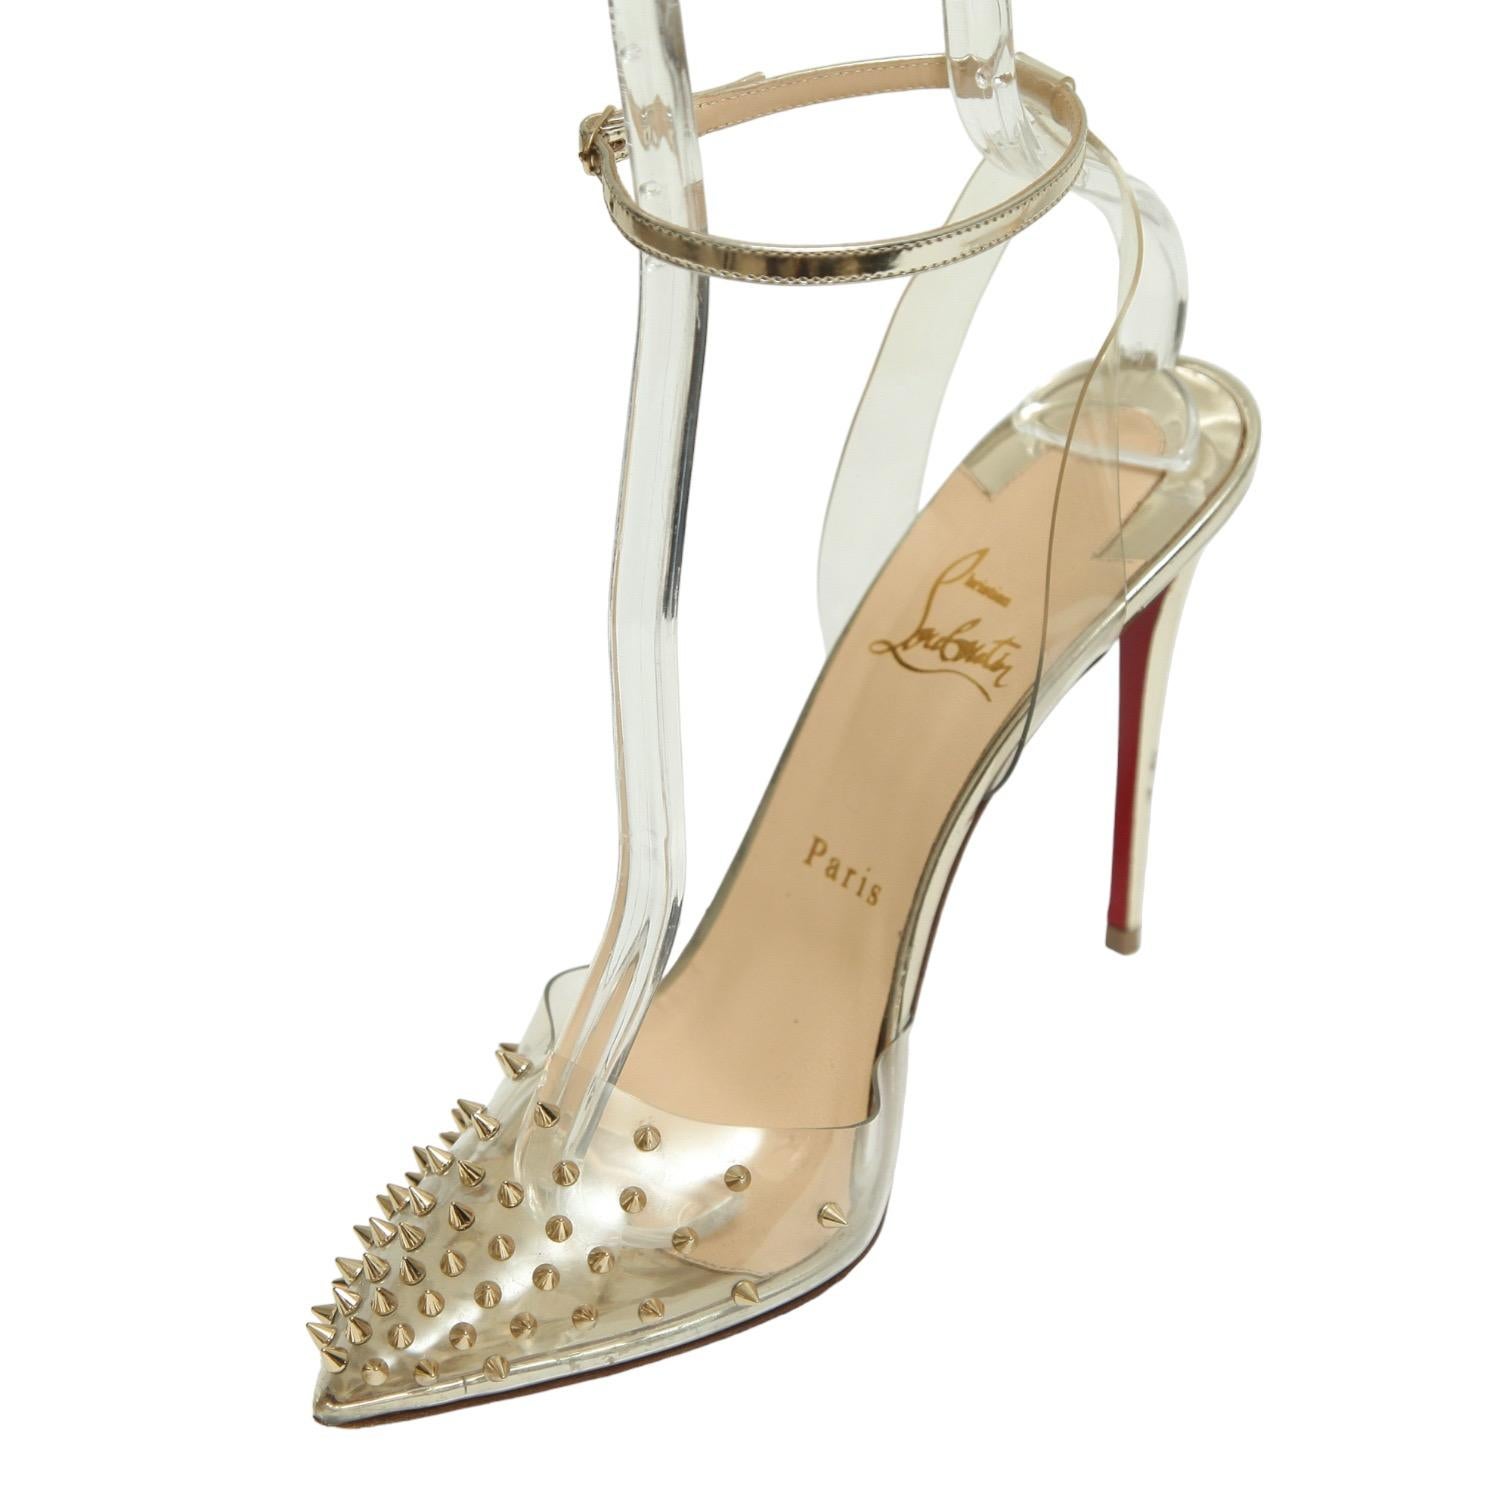 CHRISTIAN LOUBOUTIN Pump PVC Metallic Gold Spike SPIKOO Leather Heel 100mm 39.5 In Good Condition For Sale In Hollywood, FL